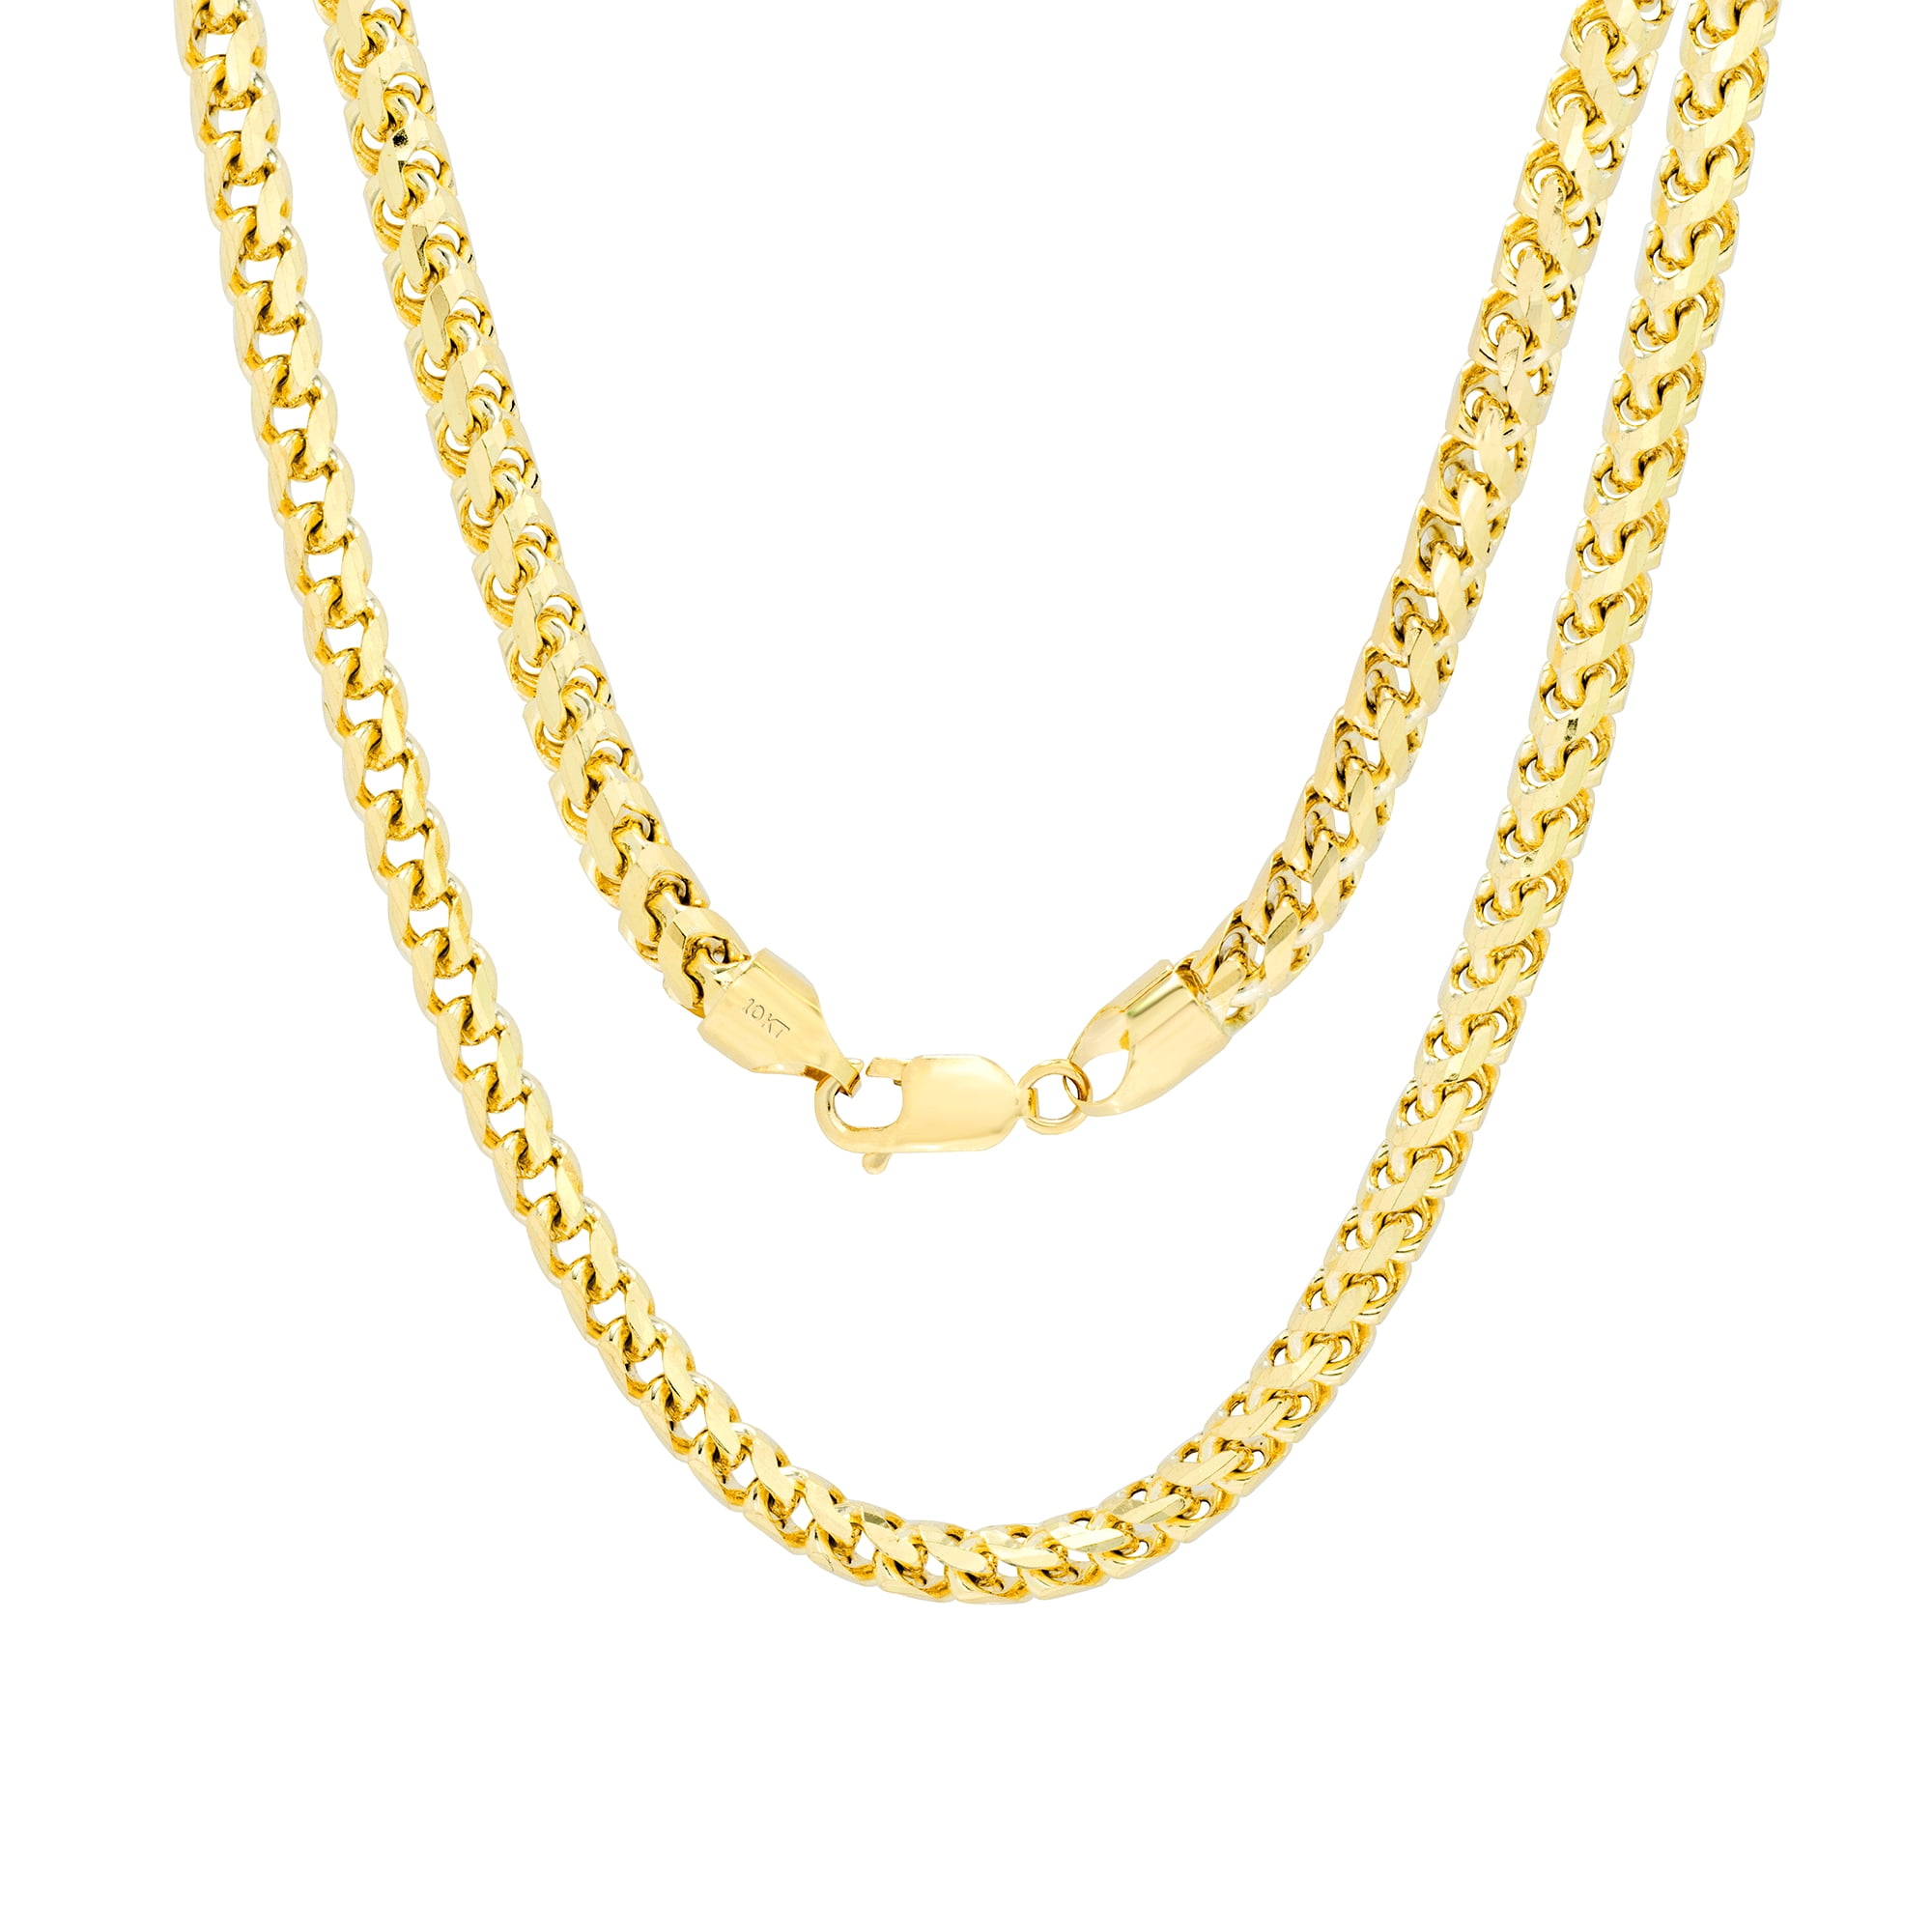 10K Yellow Gold 2.5mm Foxtail Box Wheat Franco Pendant Necklace Chain 16" 30"